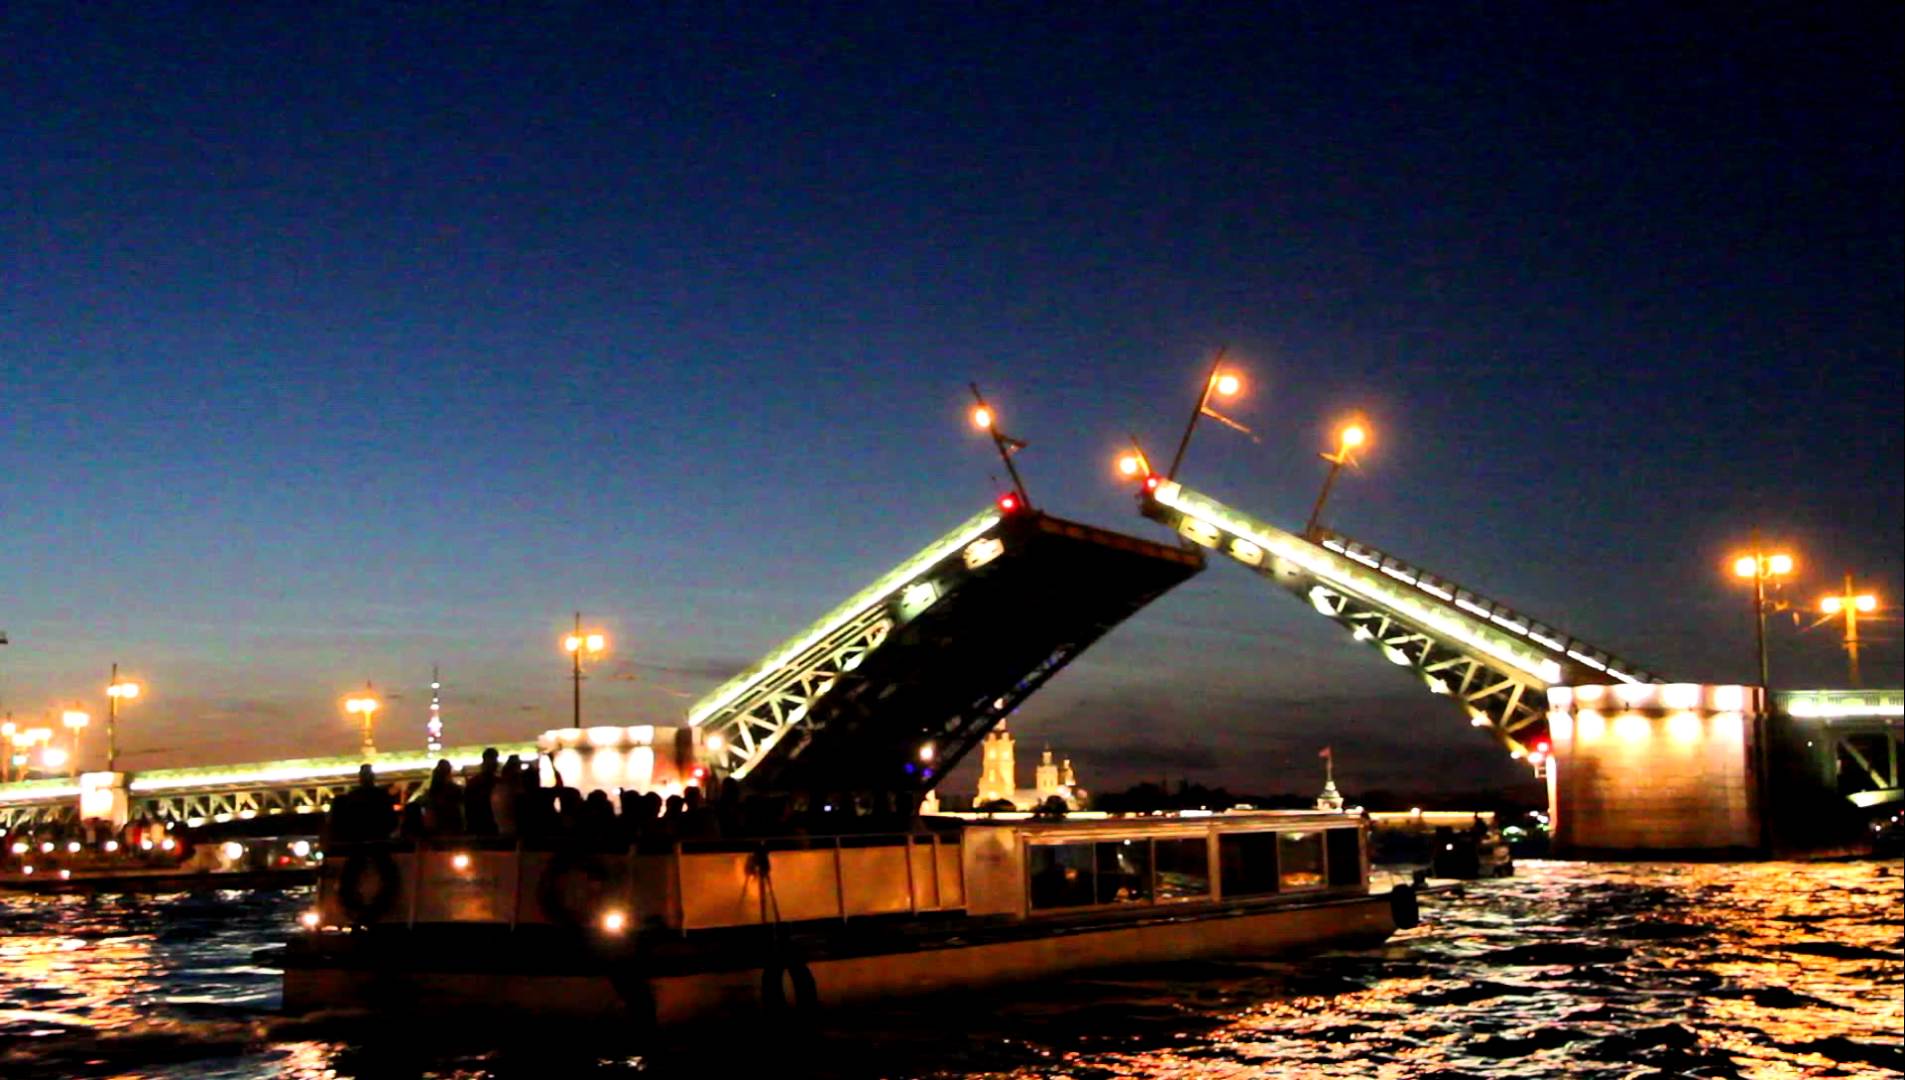 Raise of the Palace Bridge in St-Petersburg on 18/7/2011 - YouTube